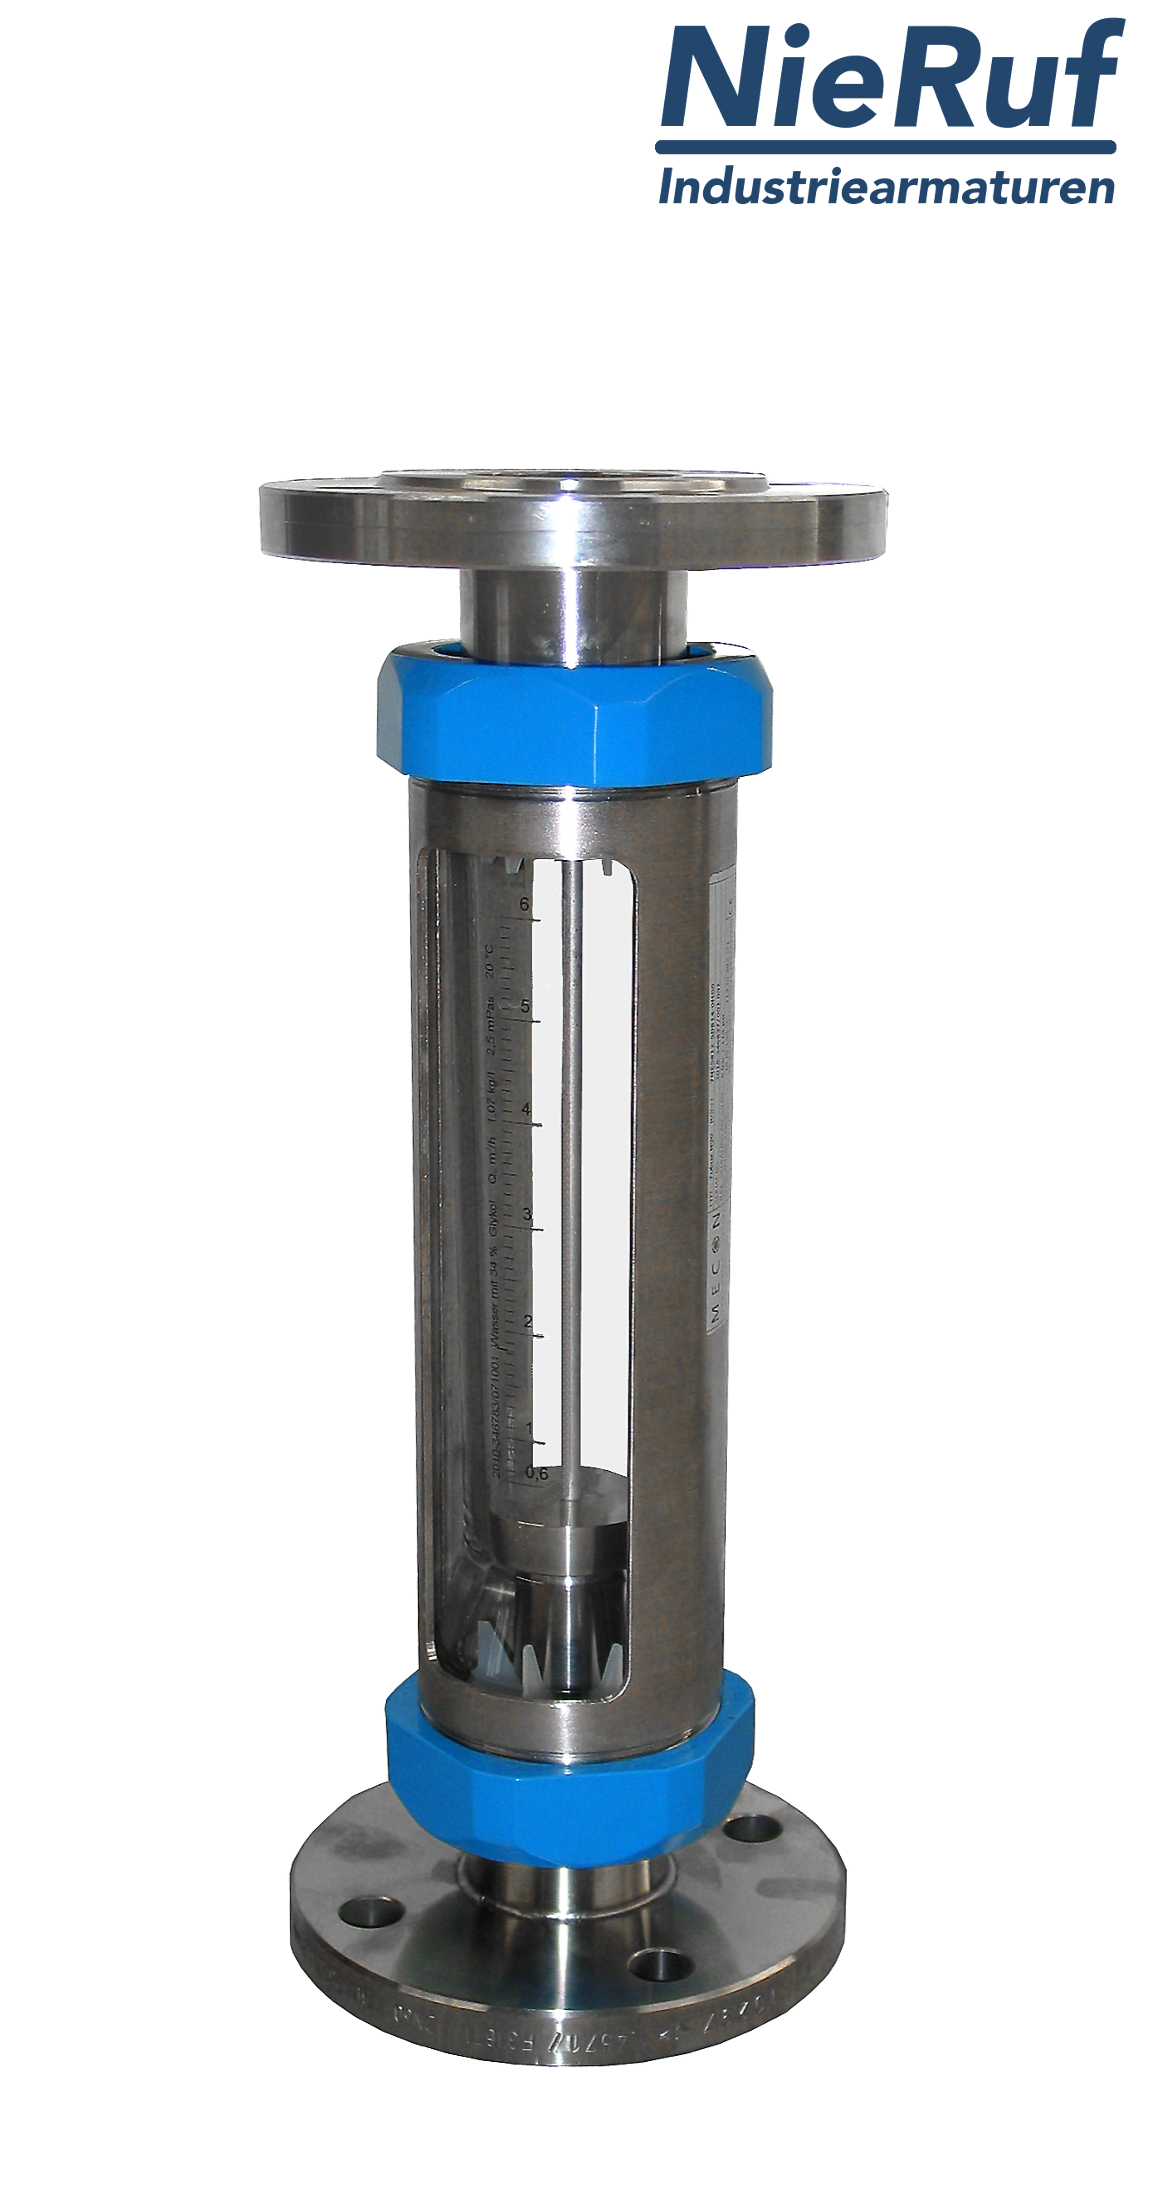 Variable area flowmeter stainless steel + borosilicate flange DN25 5.0 - 50.0 l/h water FKM